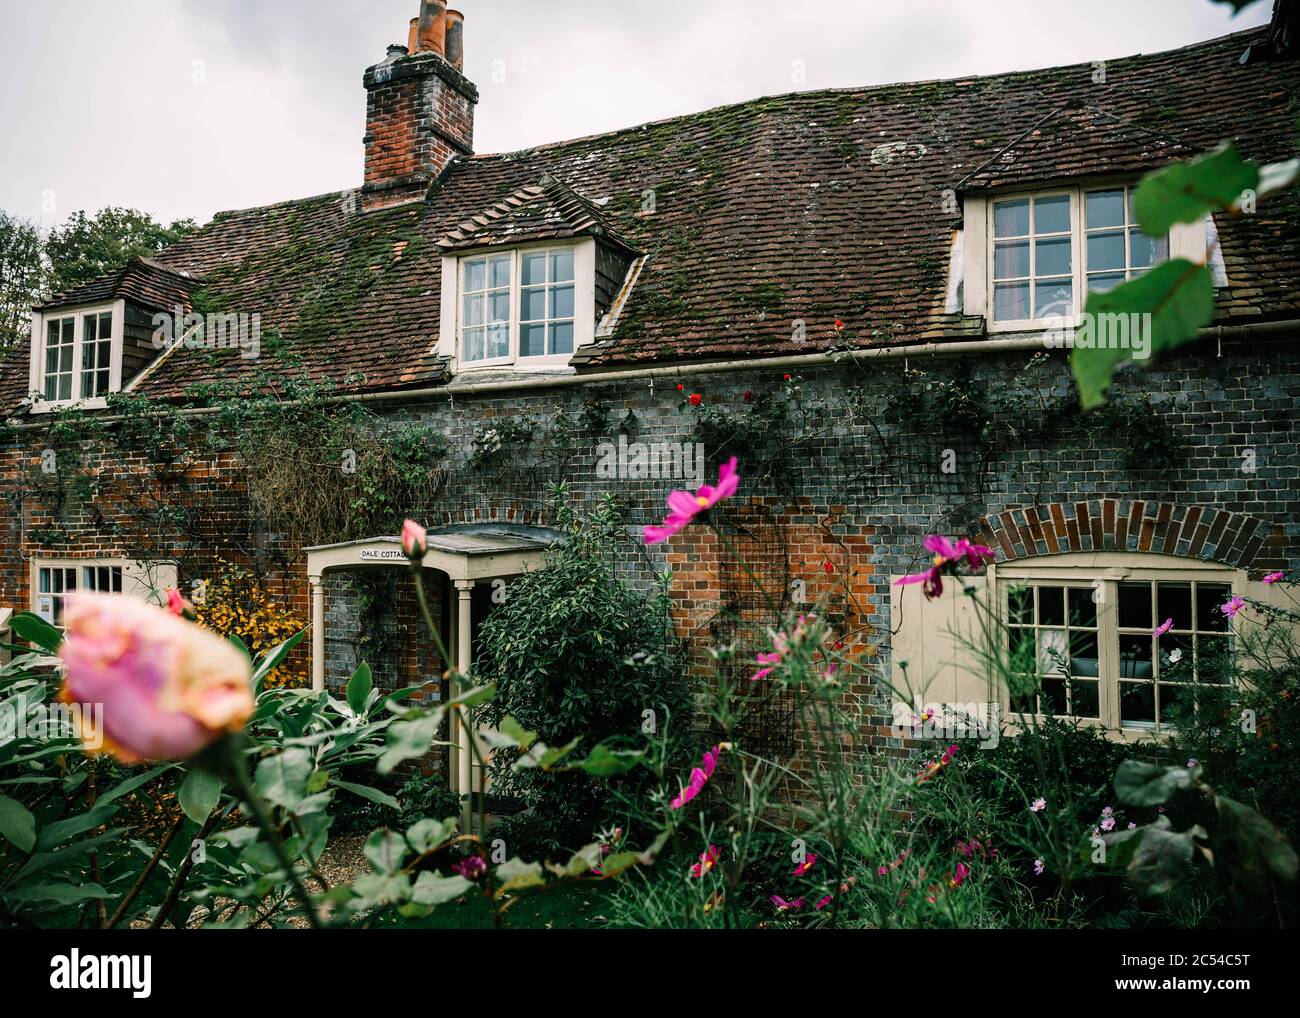 Charming medieval house with blooming pink roses in the village of Wickham, Hampshire, United Kingdom on a cloudy, moody day Stock Photo